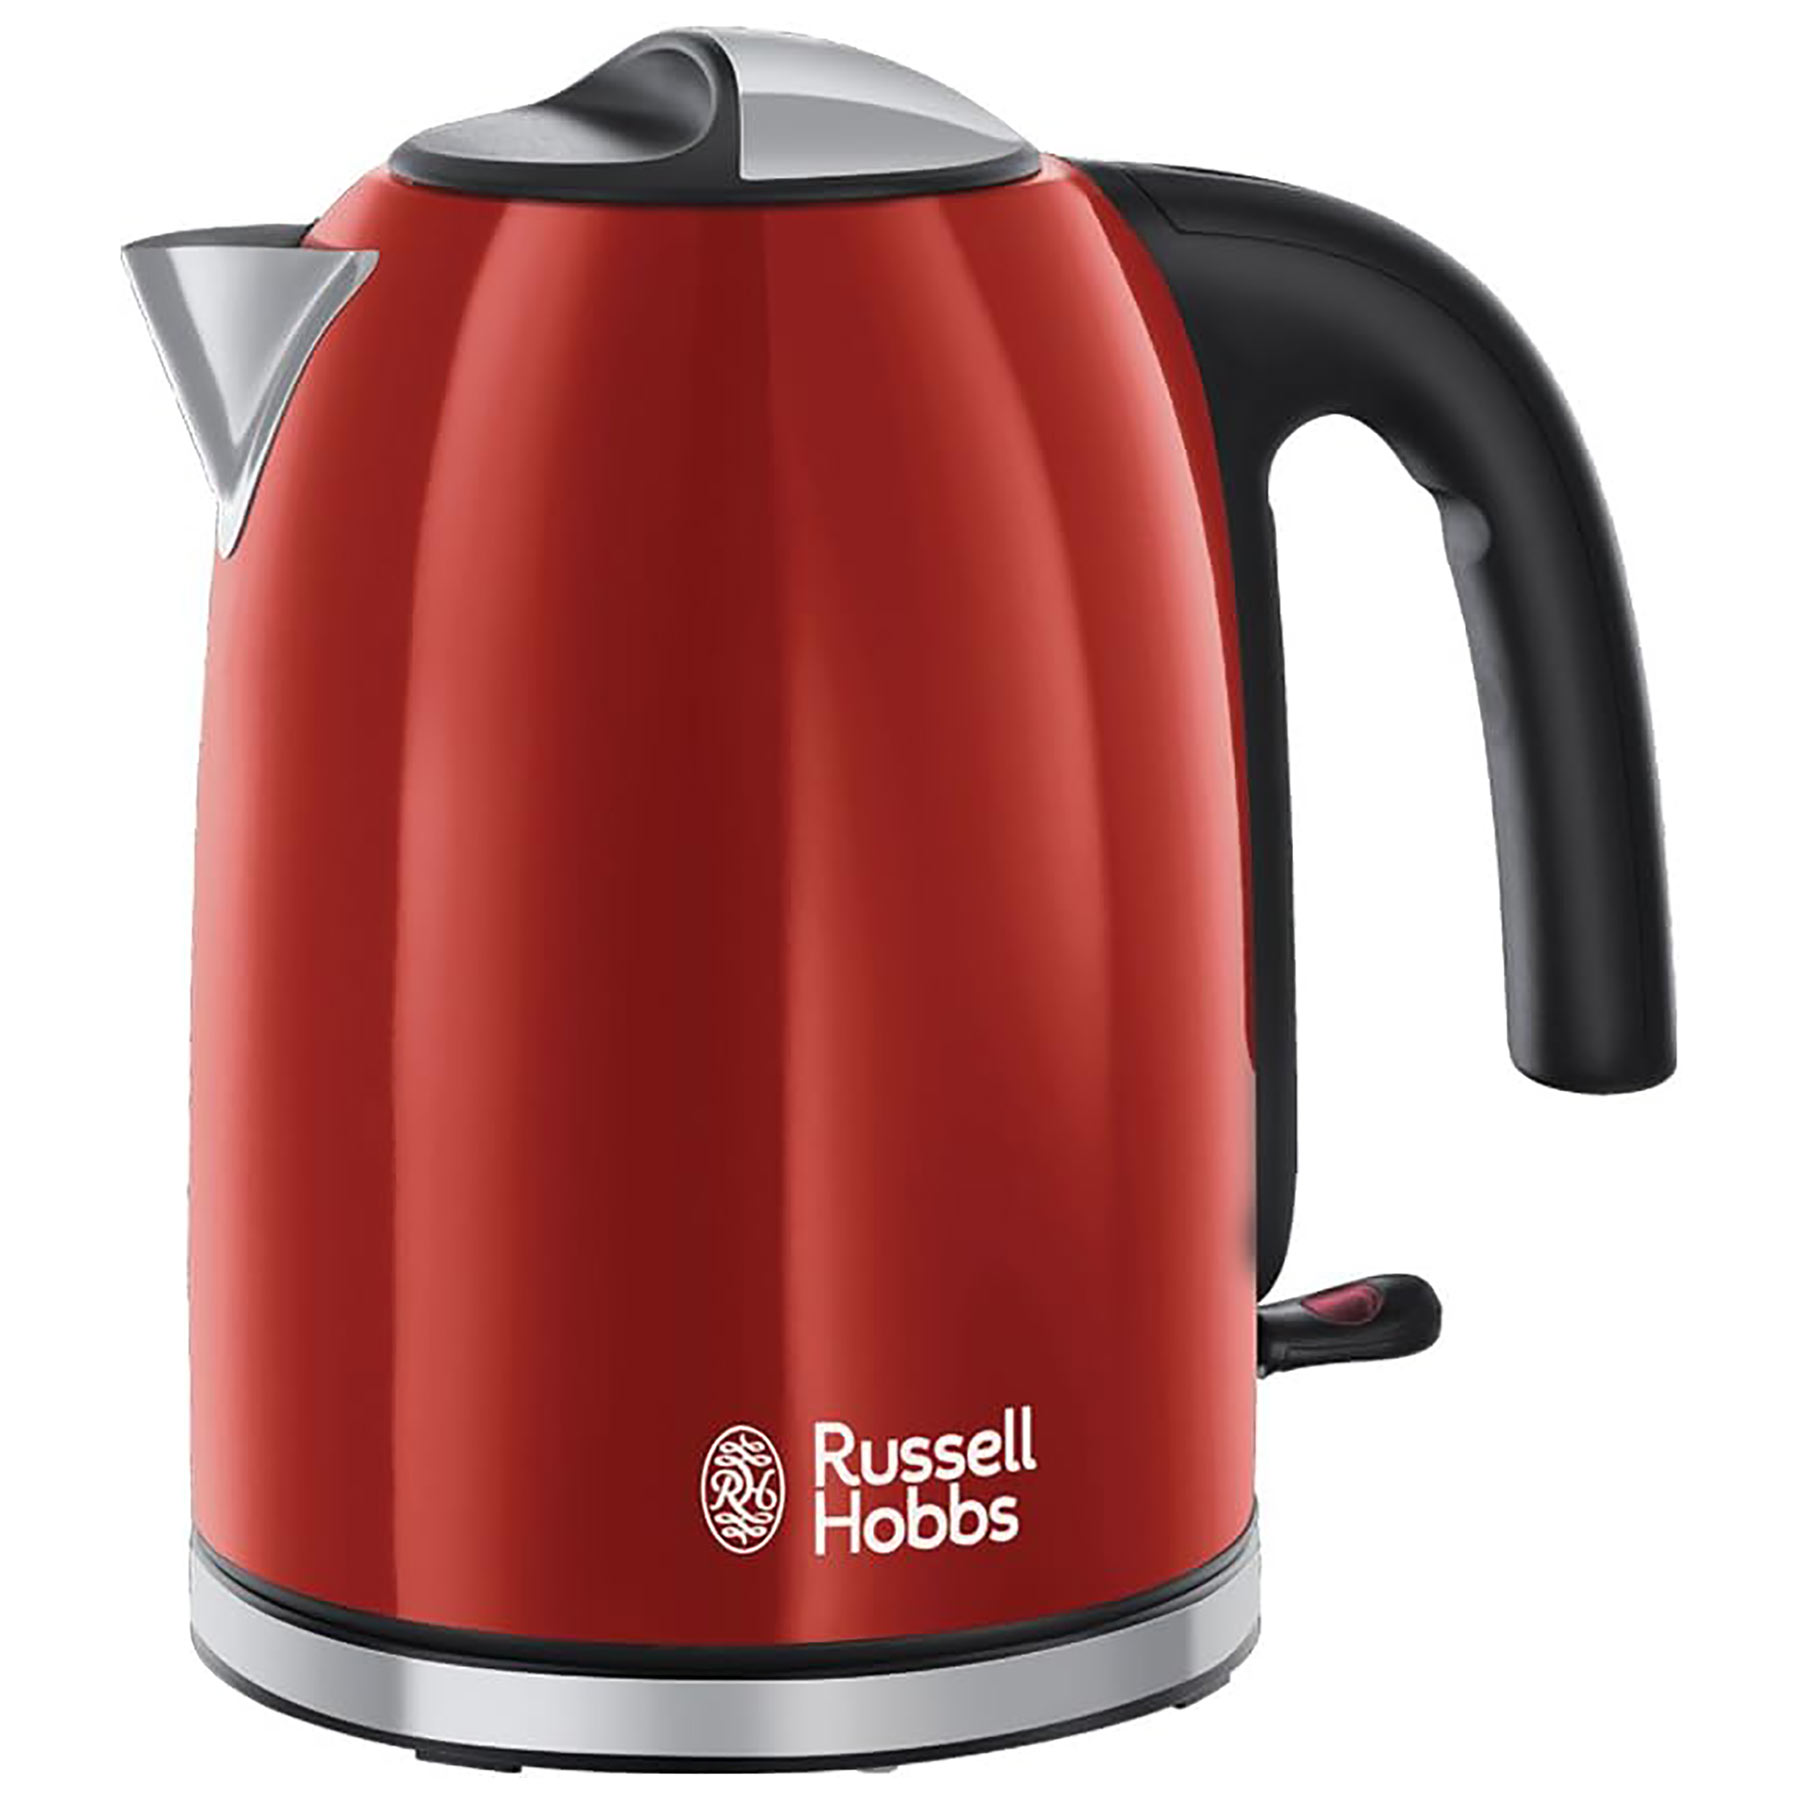 Image of Russell Hobbs 20412 Colours Plus Jug Kettle in Red 1 7L